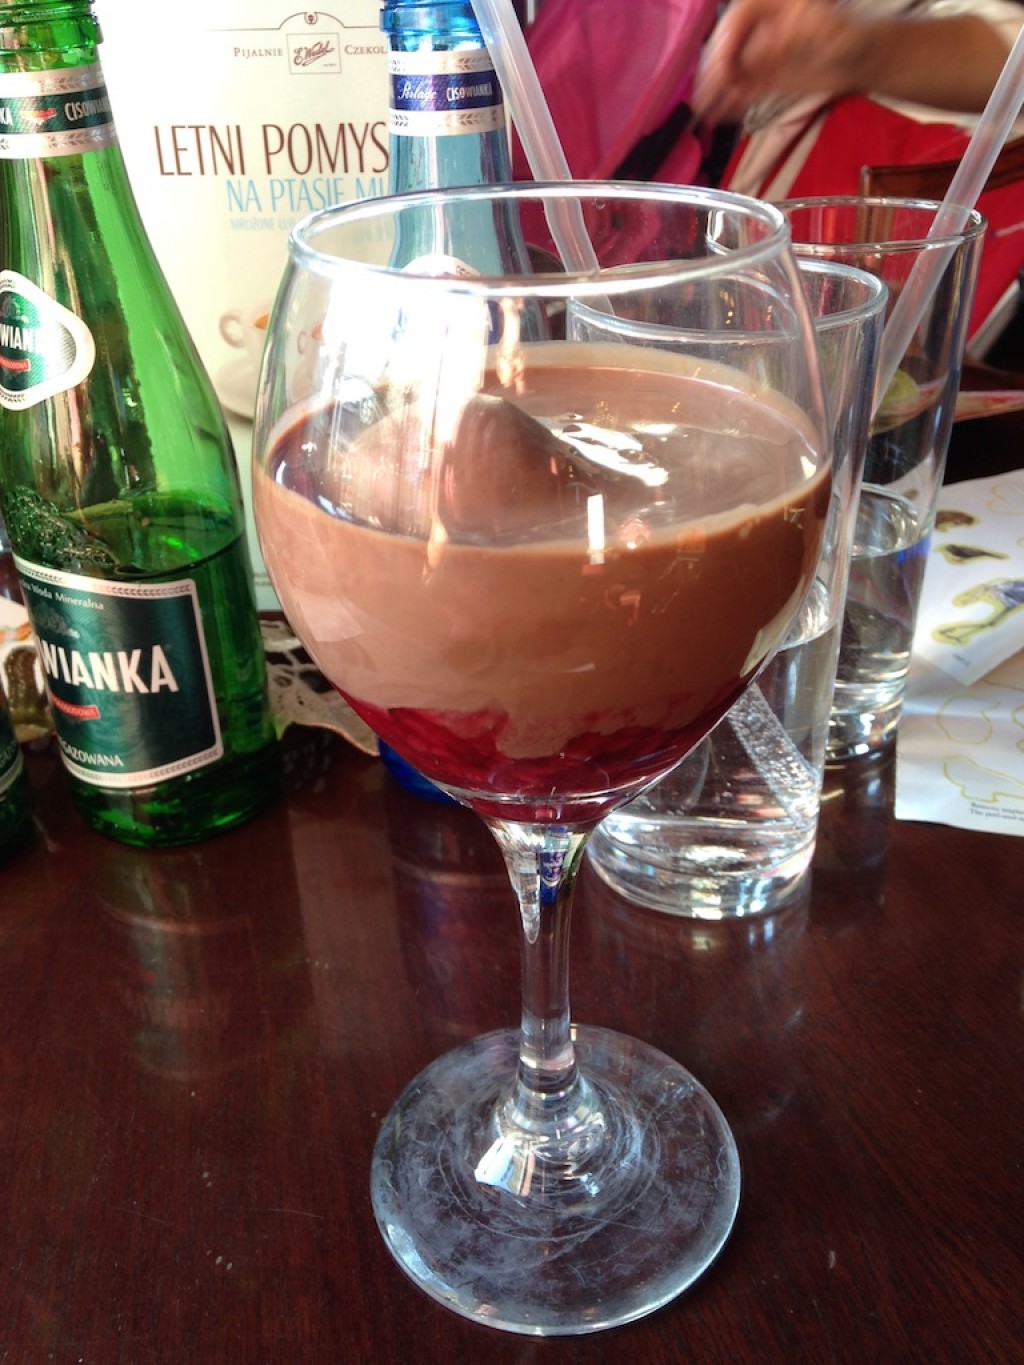 Delicious chocolate and raspberry drink at E. Wedel (with alcohol, of course)
